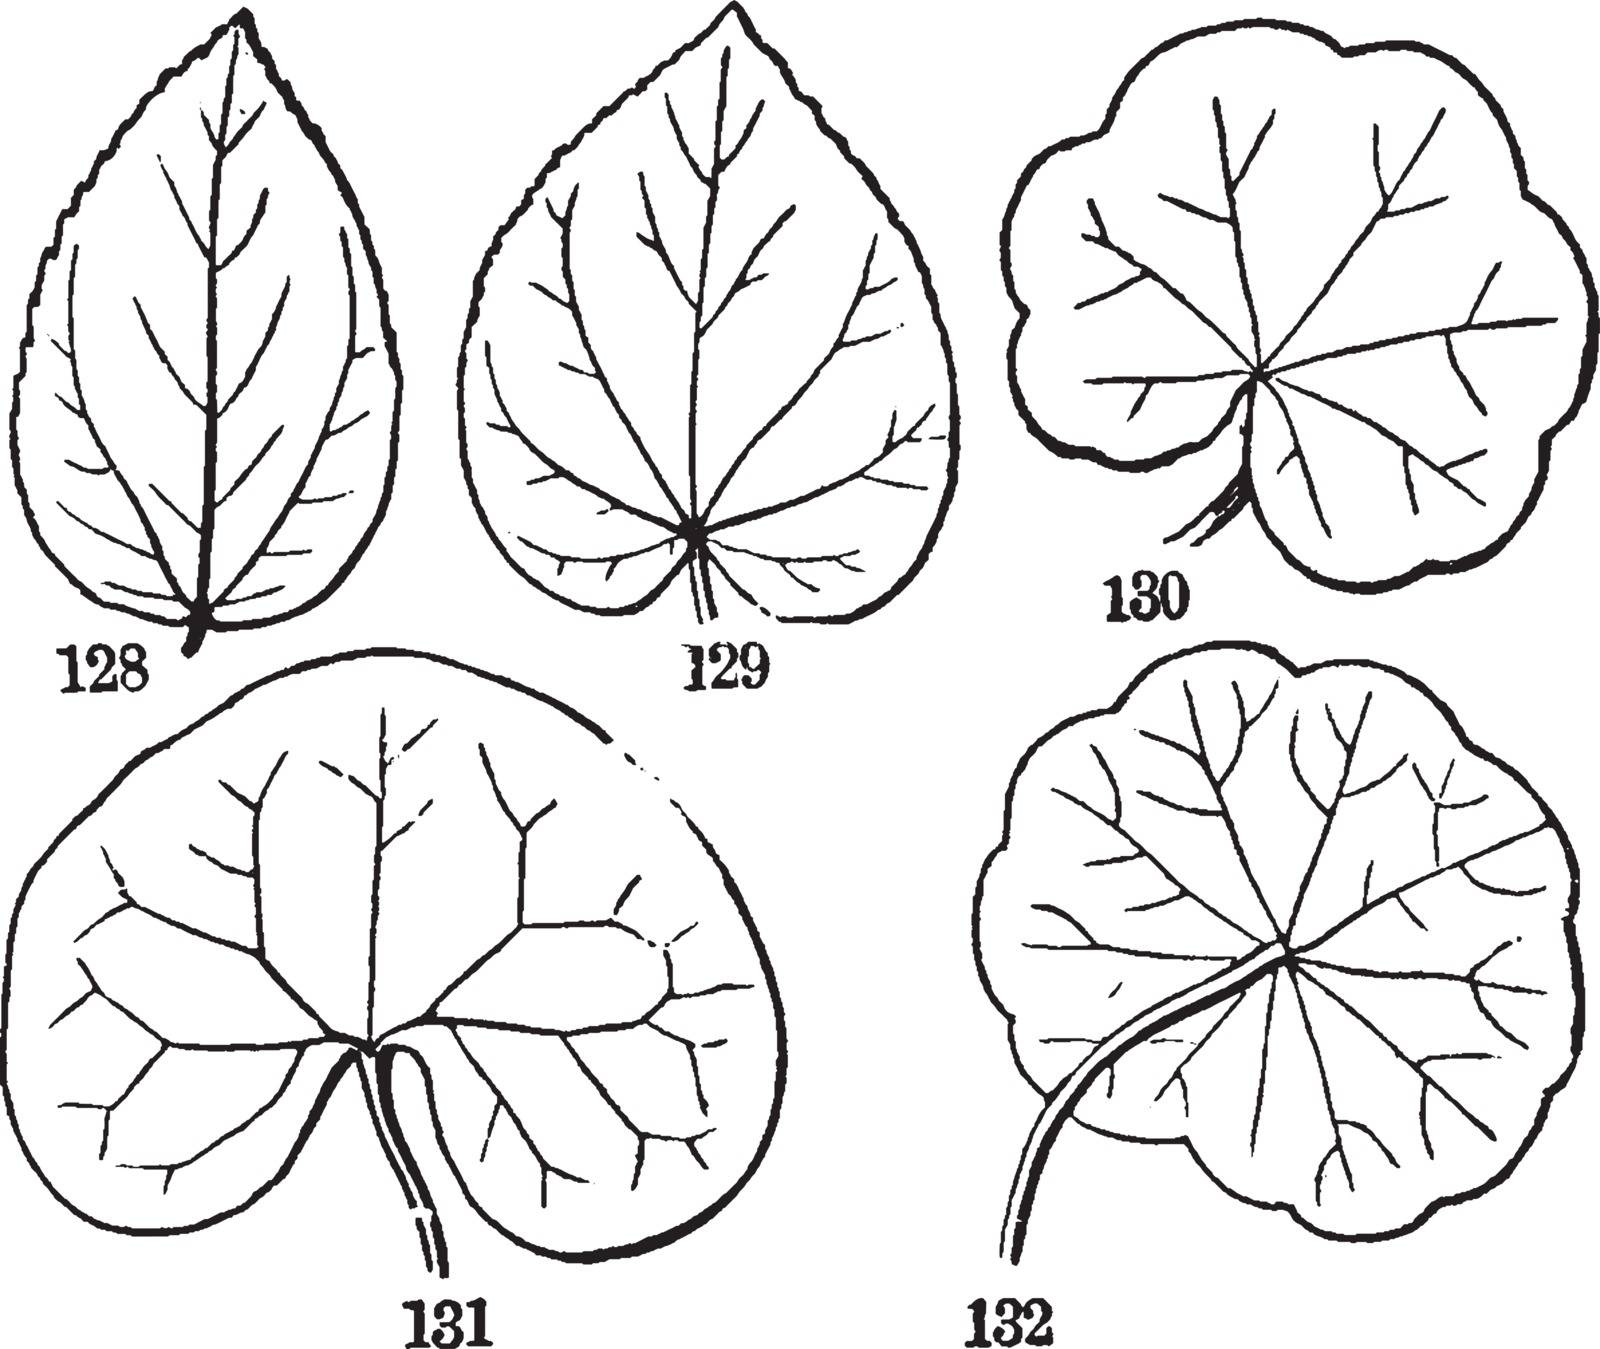 A picture showing the various forms of radiatte-veined leaves, vintage line drawing or engraving illustration.